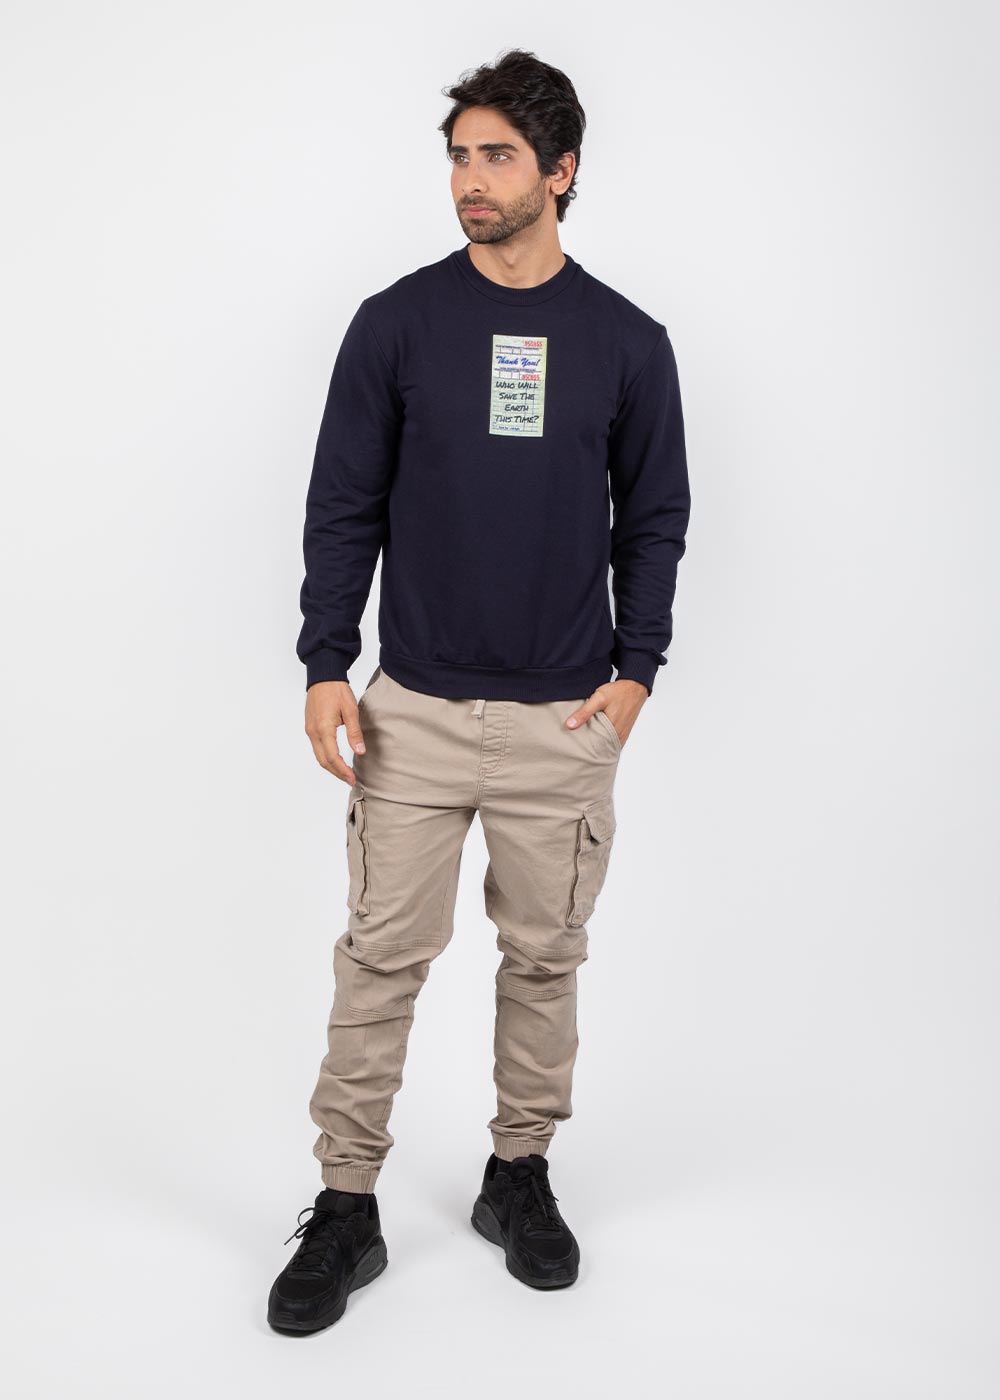 Pullover Azul para Hombre: Who Will Save The Earth This Time